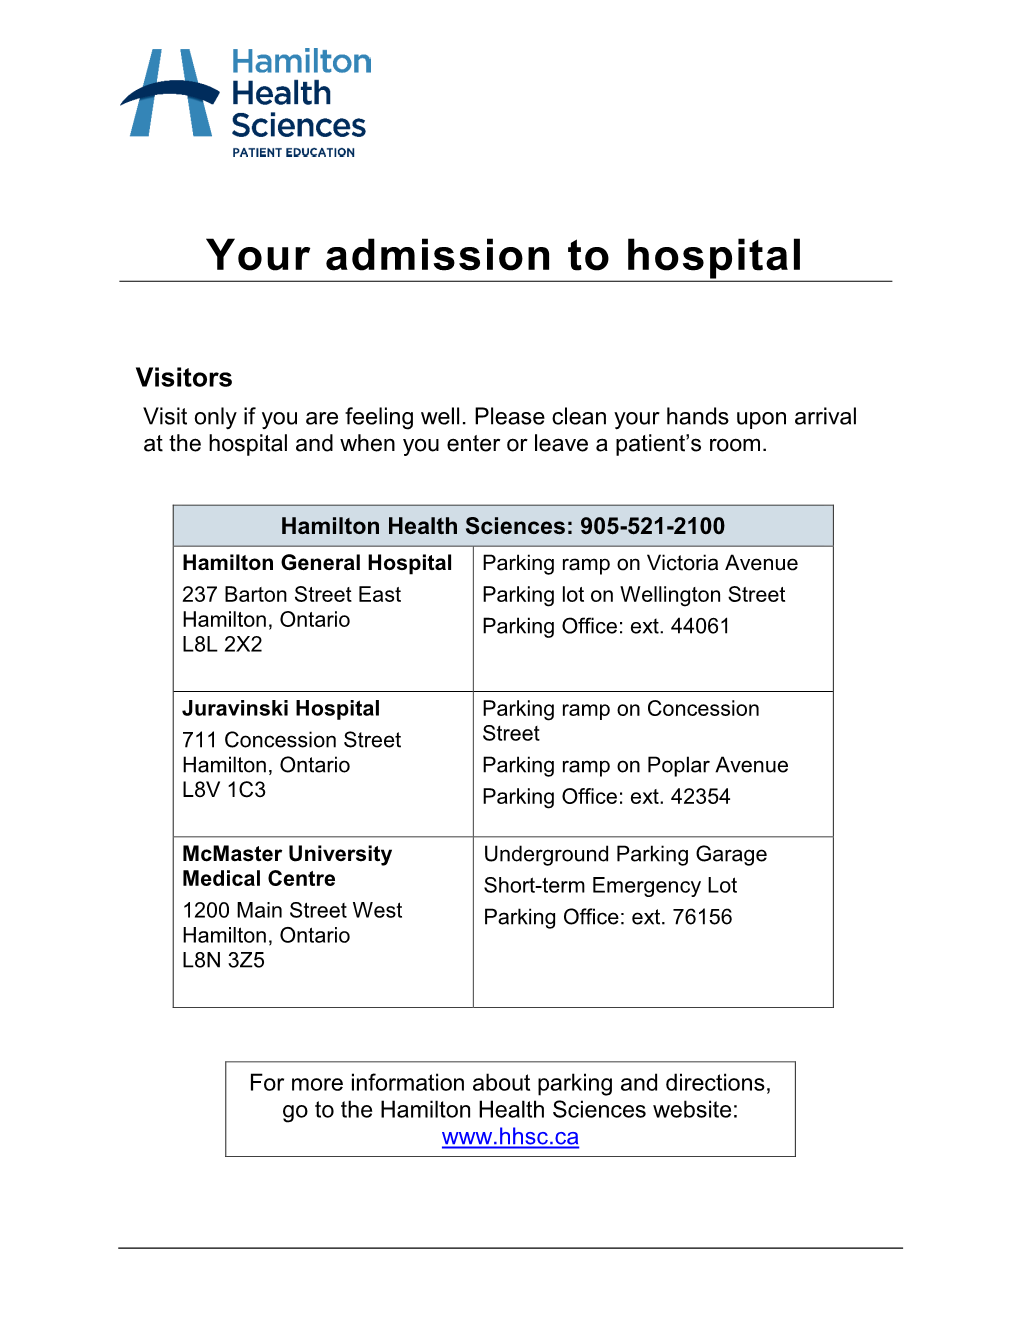 Your Admission to Hospital